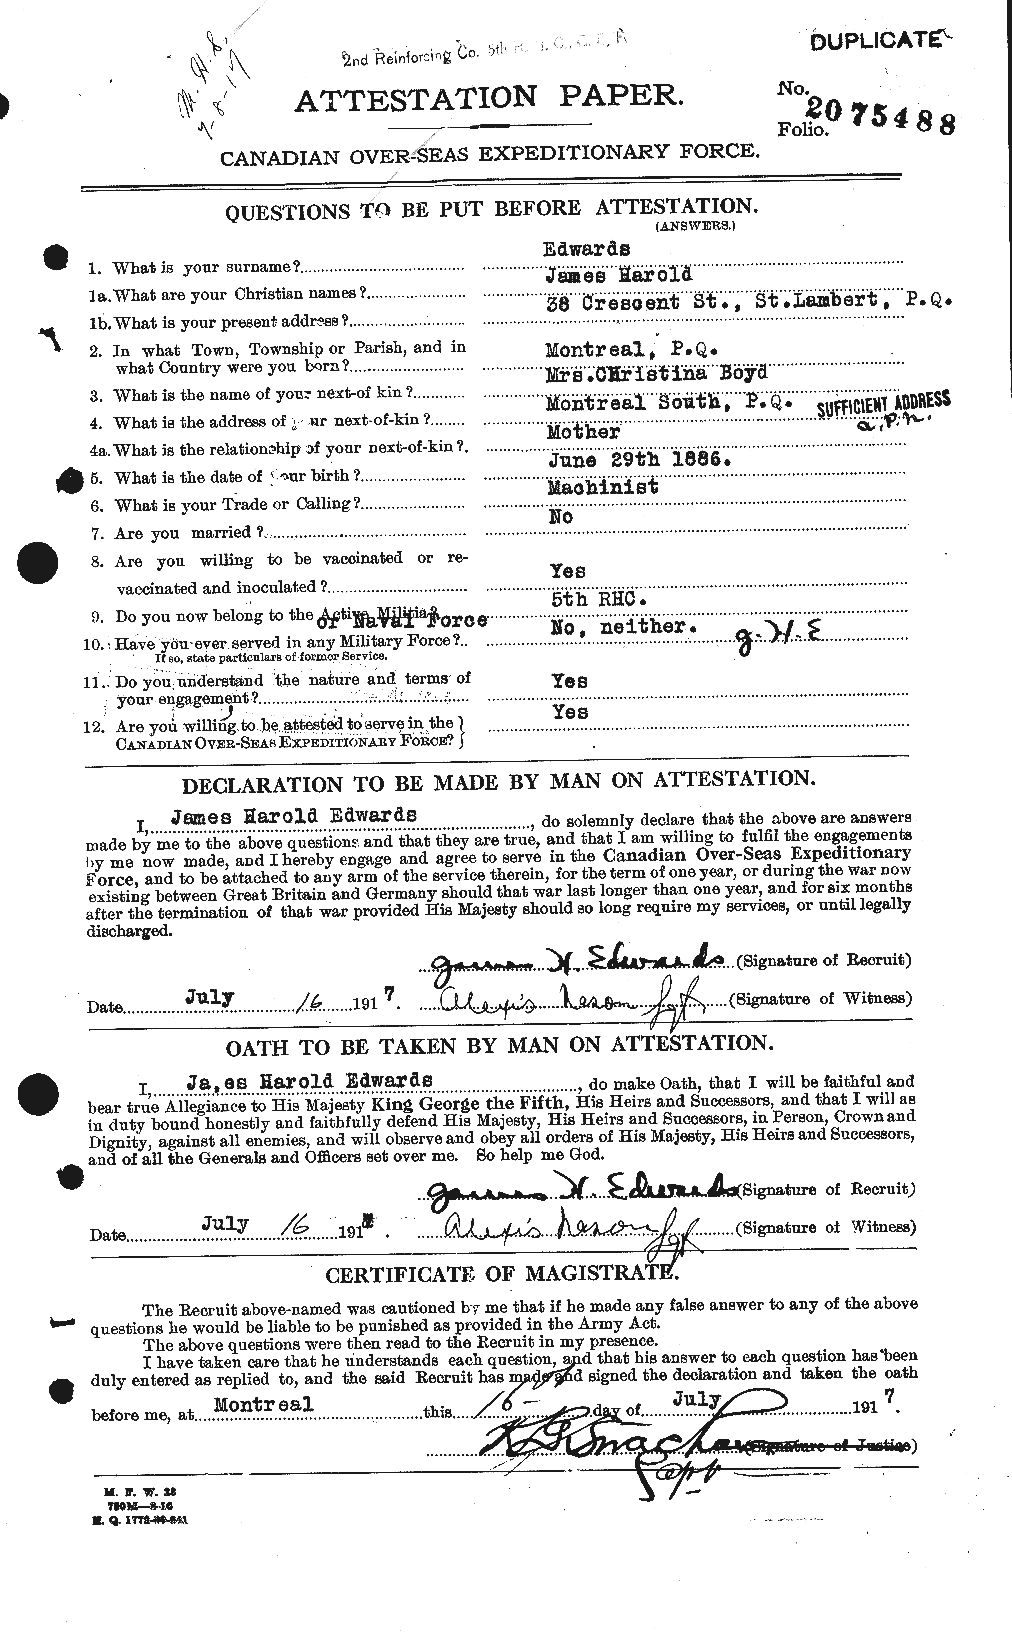 Personnel Records of the First World War - CEF 309816a